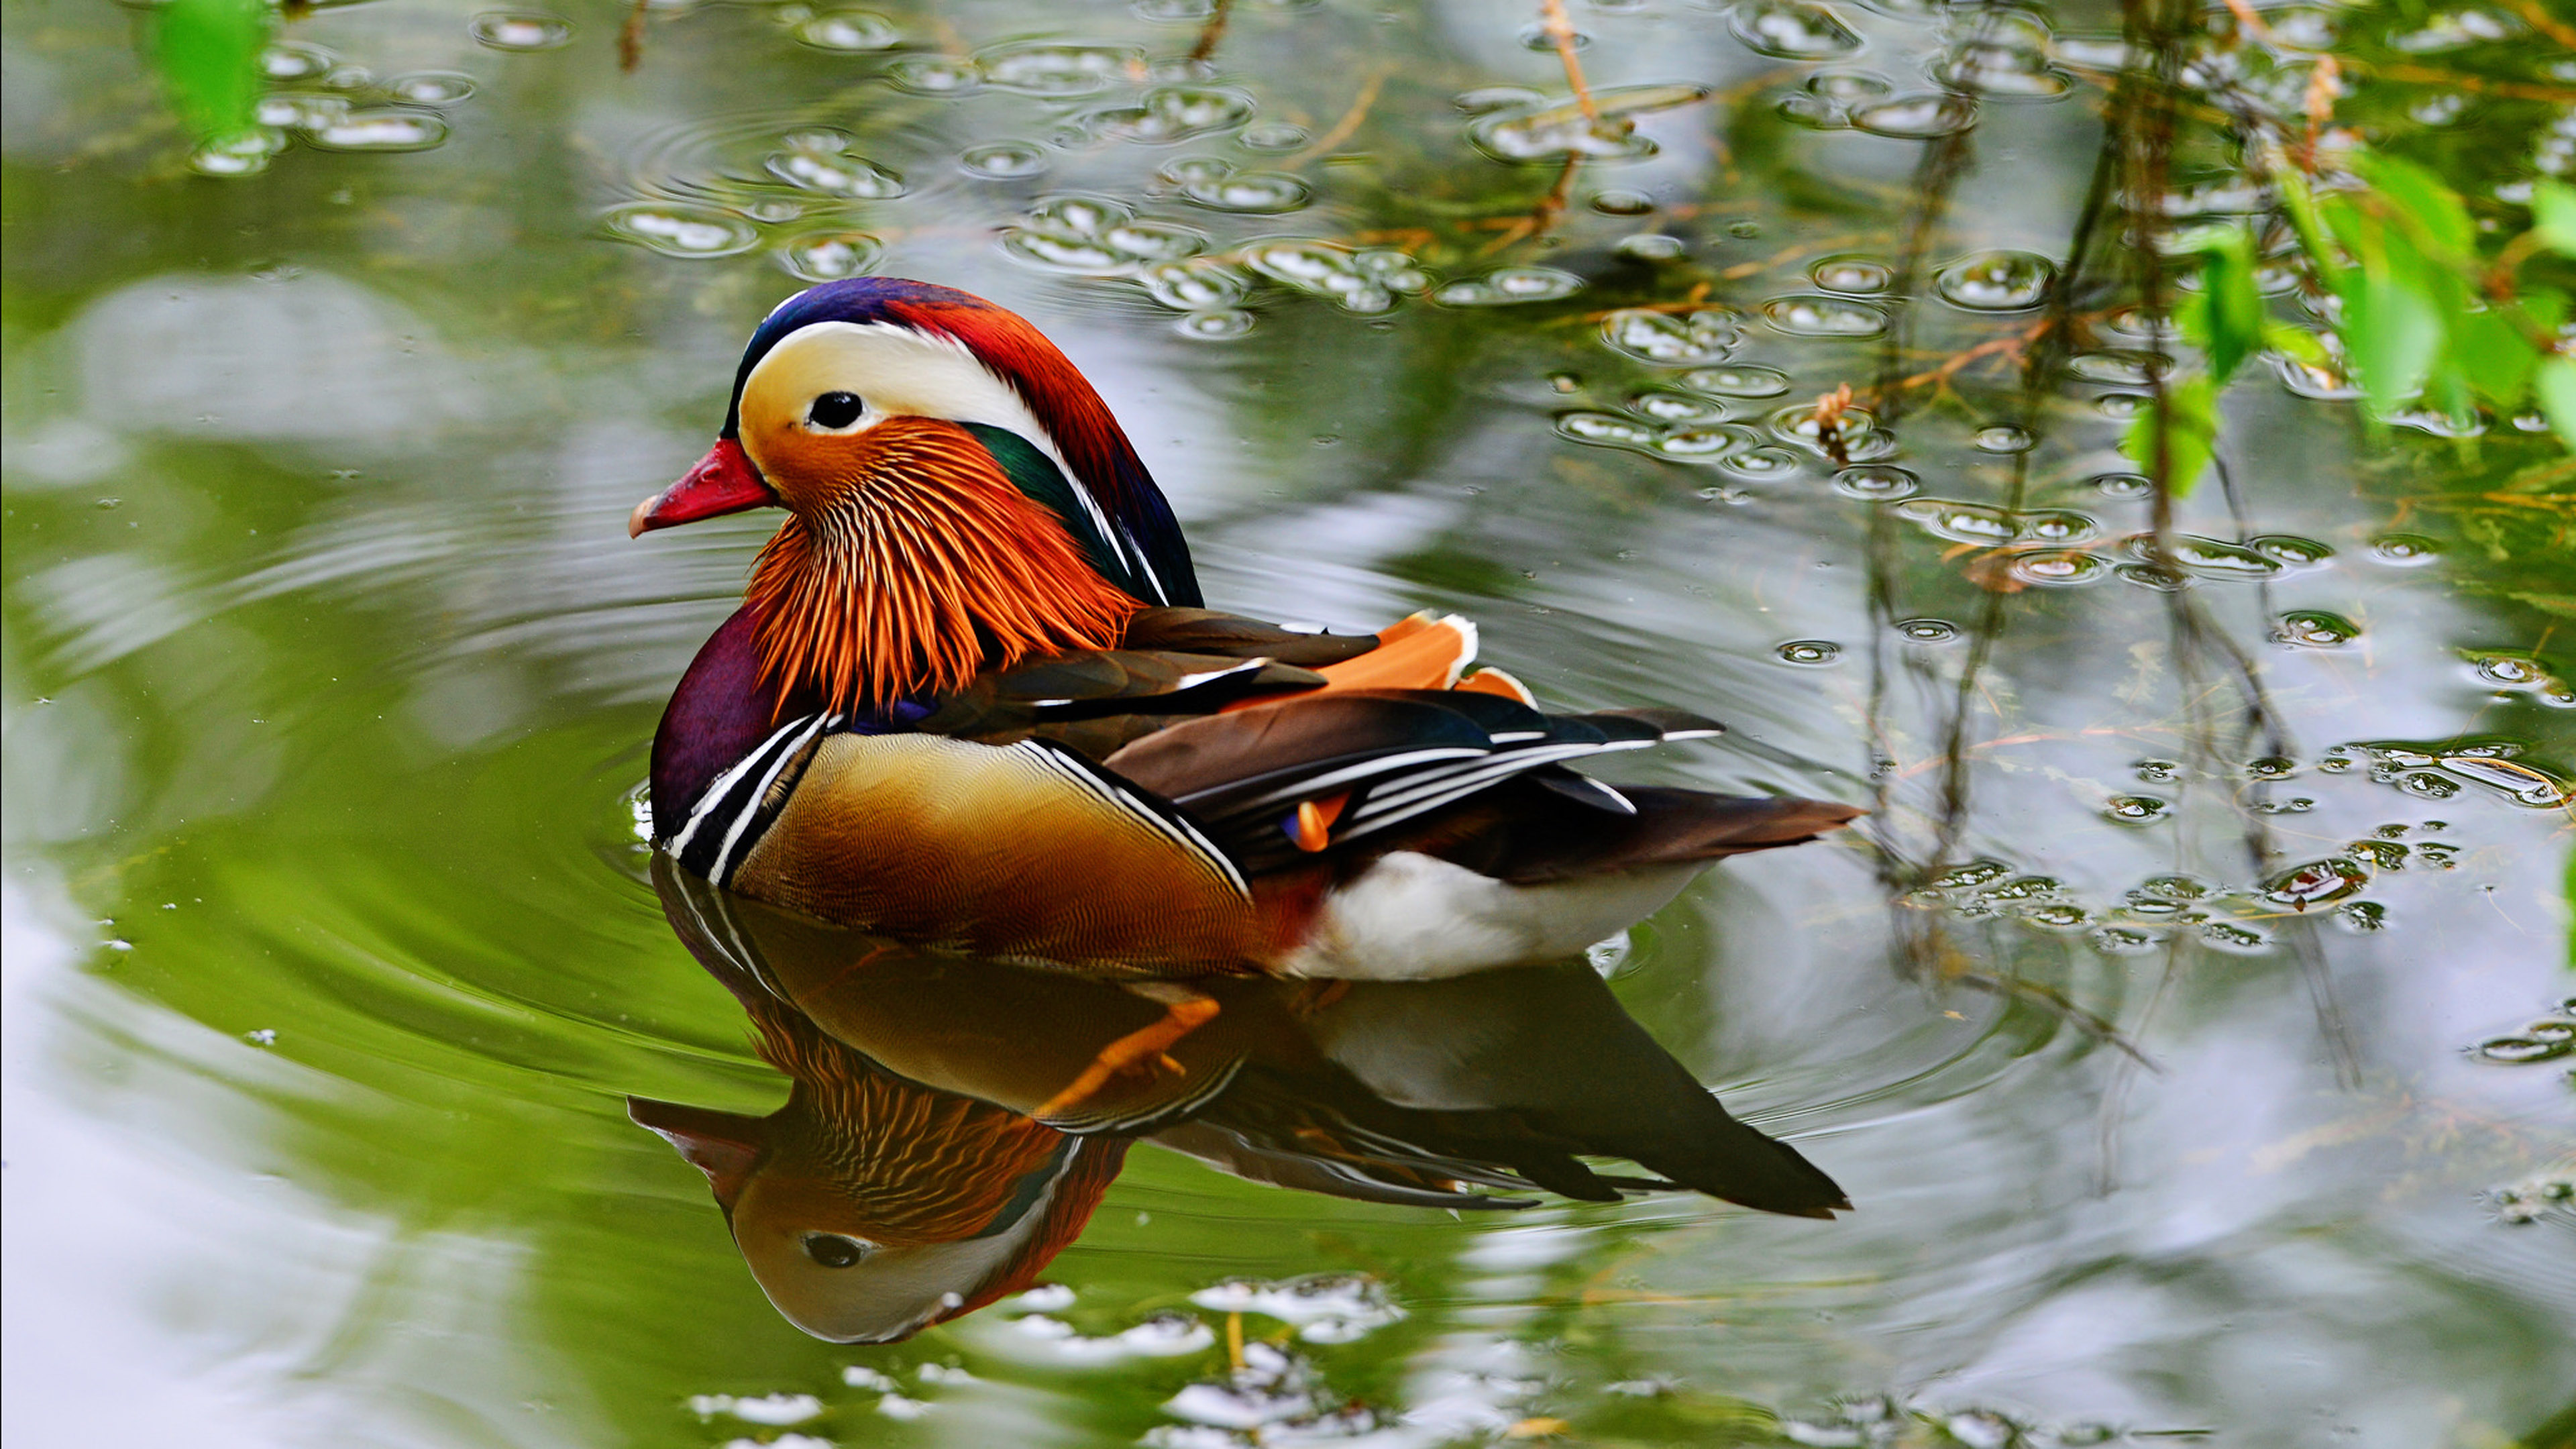 Mandarin Ducks Bird Type Duck From East Asia China Imported In The Uk